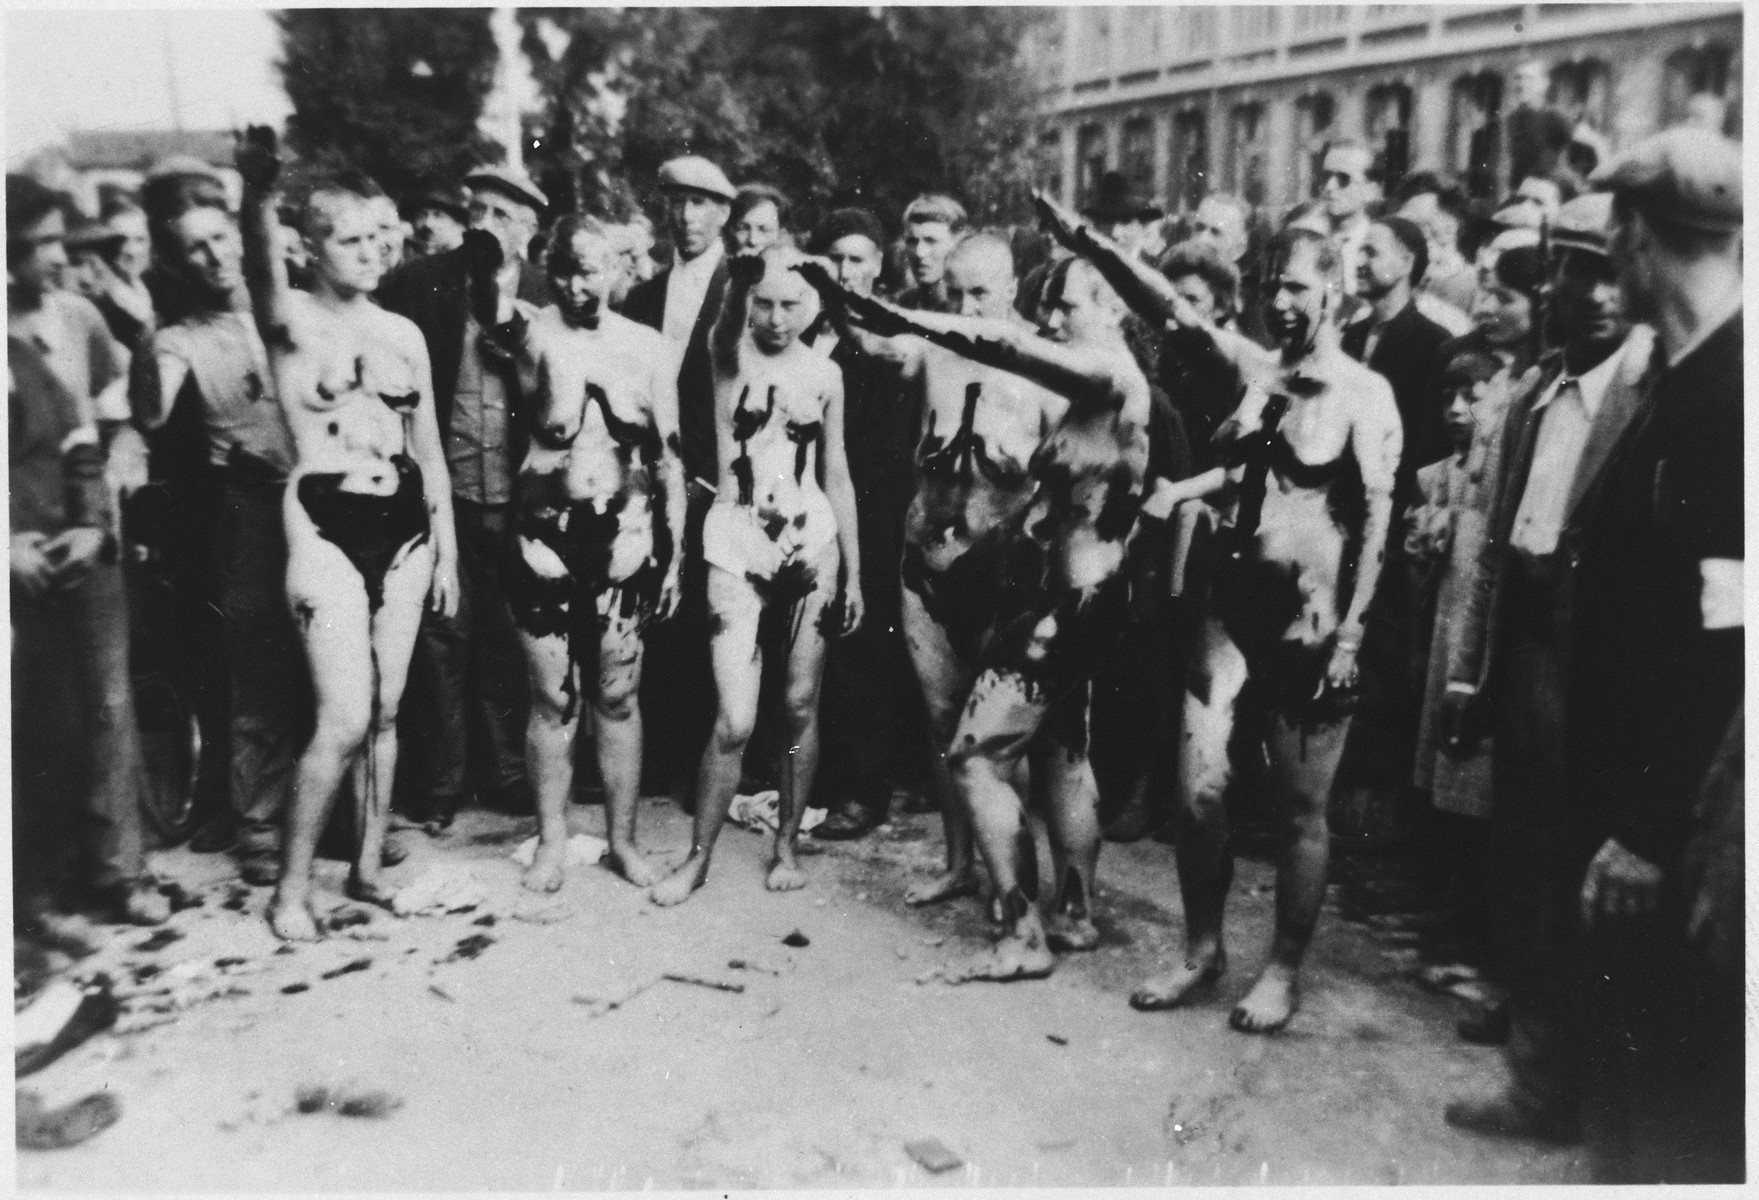 Belgian women who had collaborated with the Germans are shaved, tarred and feathered and forced to give a Nazi salute.